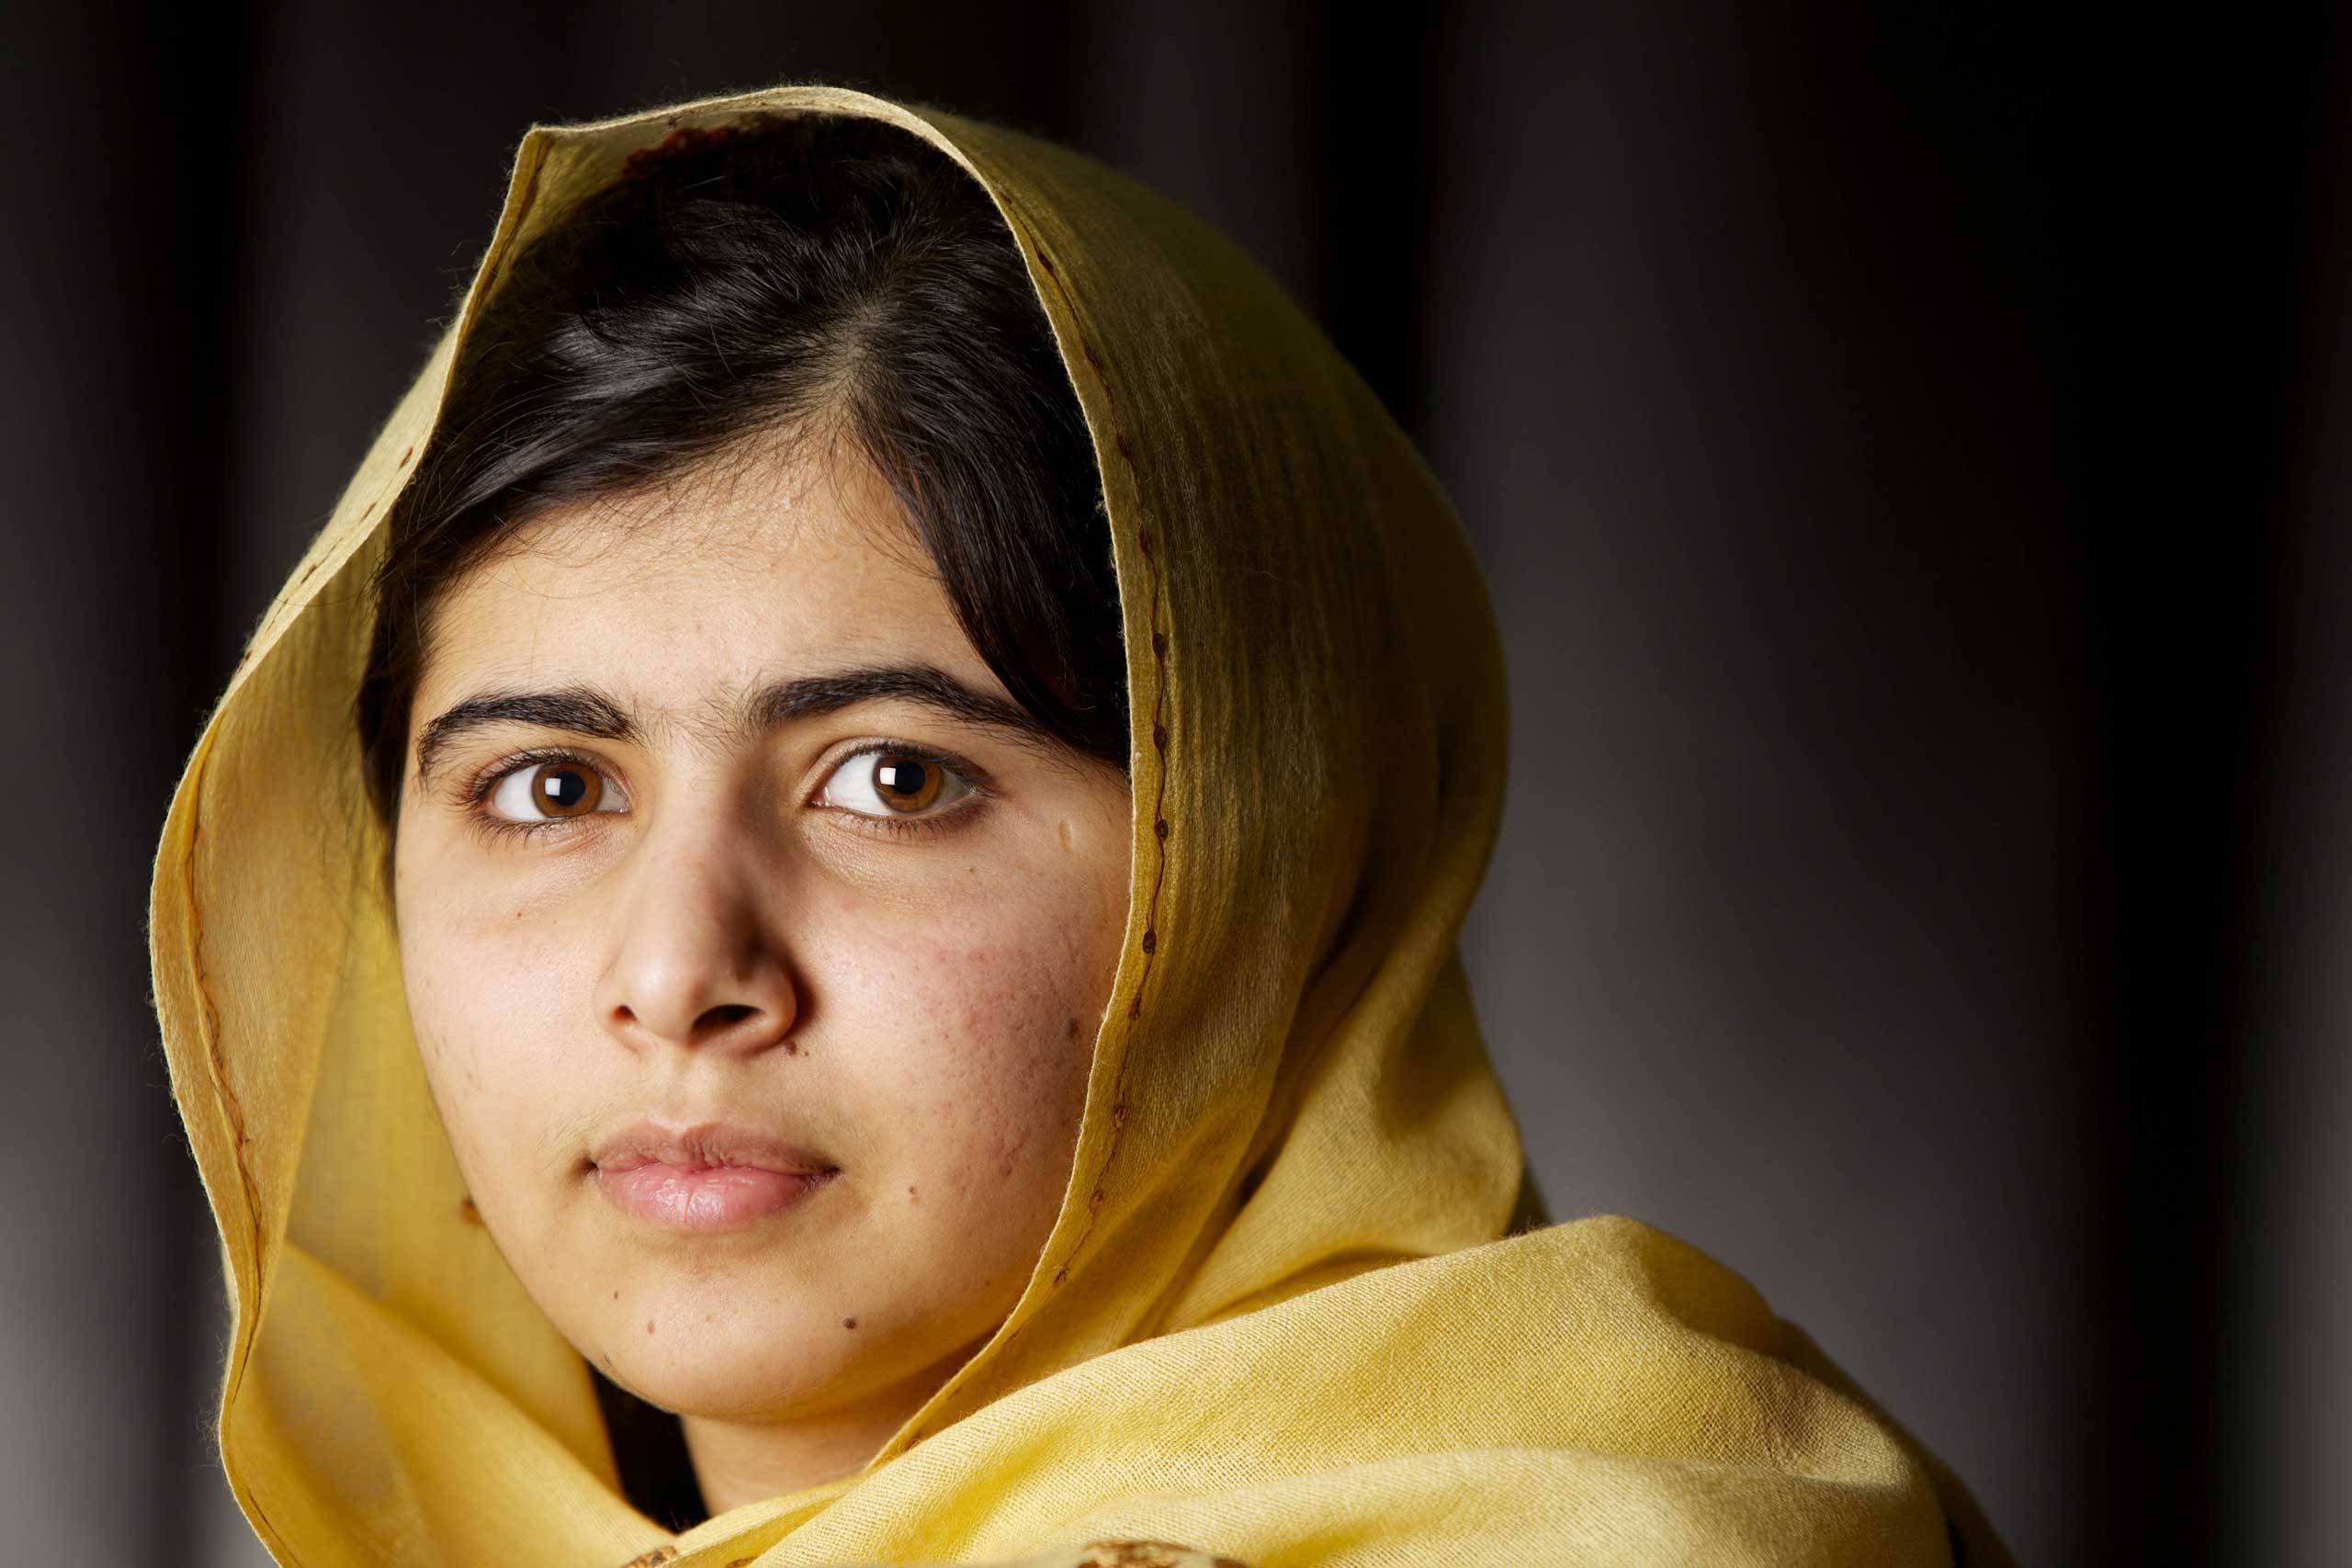 Malala Yousafzai, a name that describes the true meaning of humanity